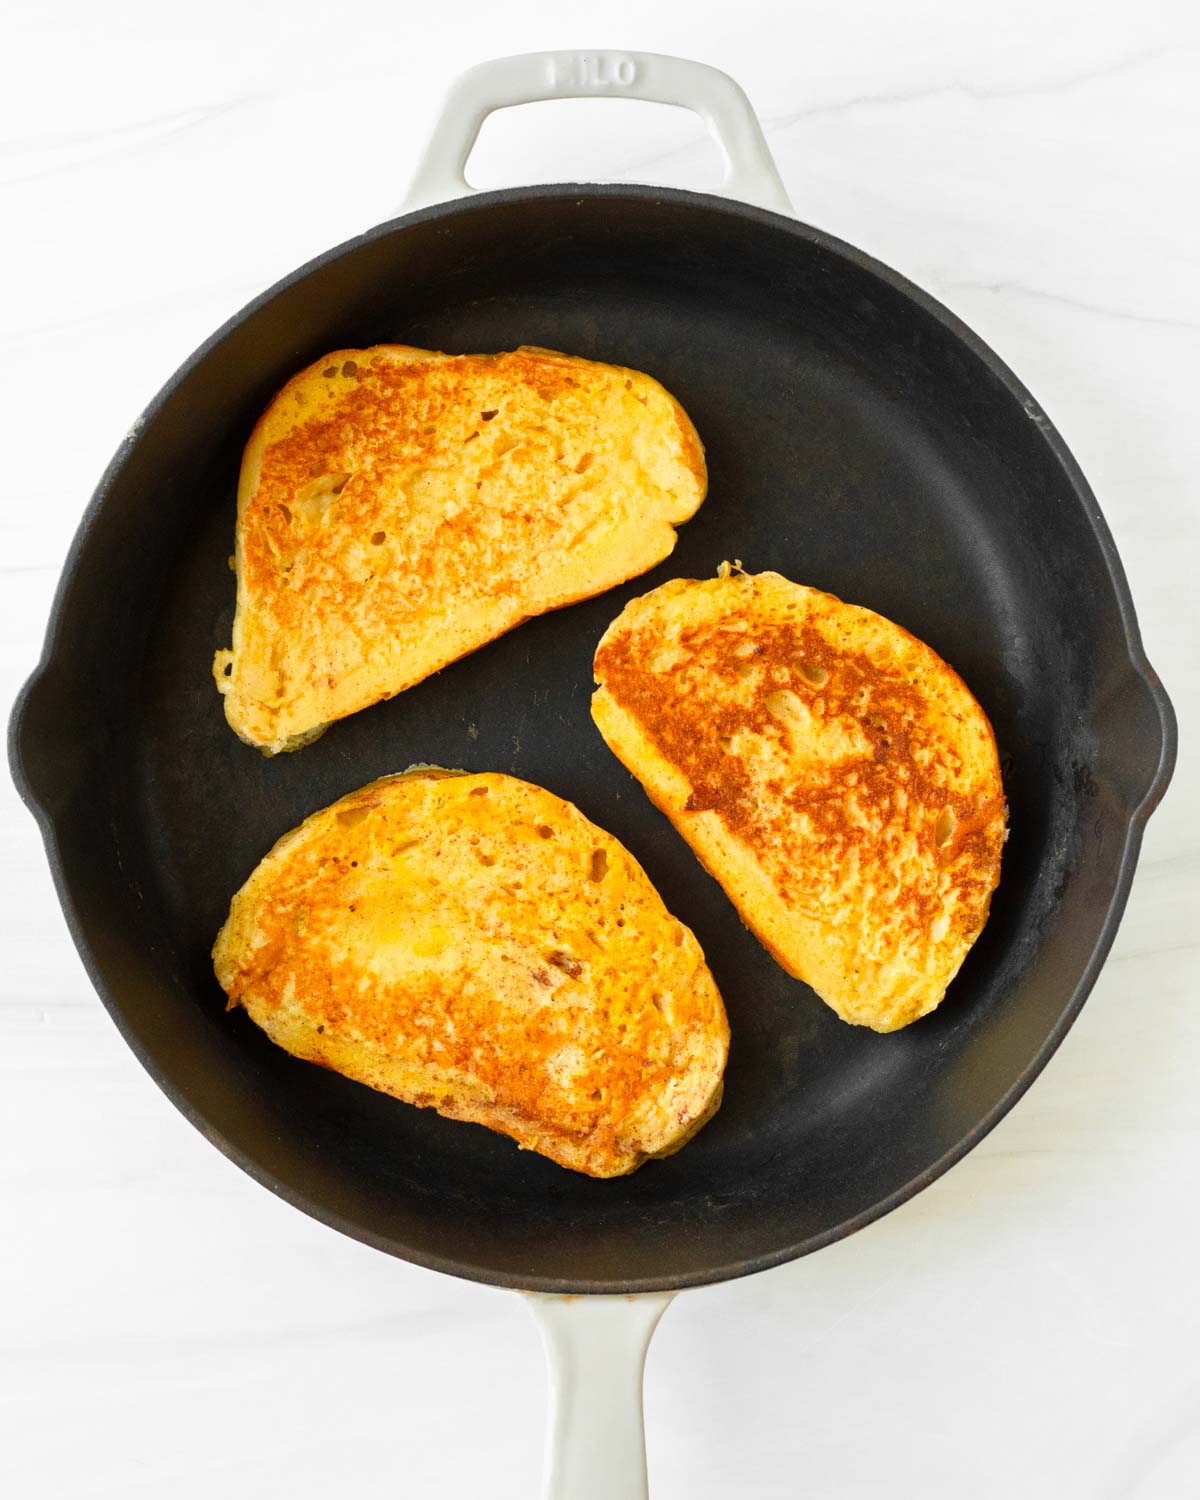 Step 3. Cook each piece of toast in a skillet or on a griddle